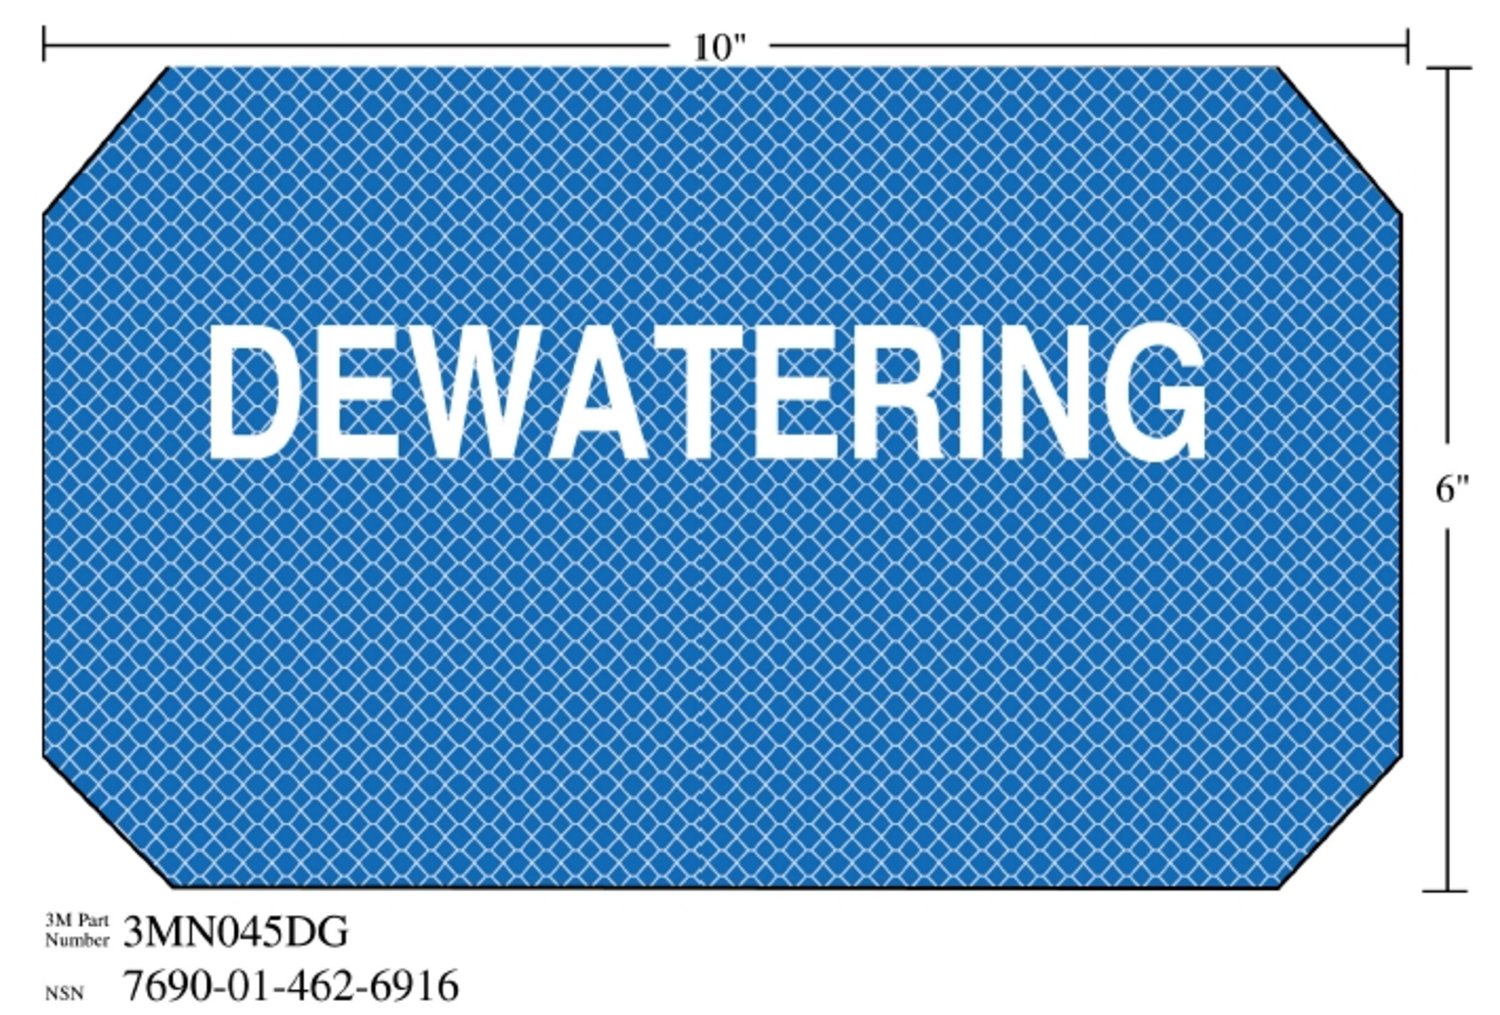 7010296996 - 3M Diamond Grade Damage Control Sign 3MN045DG, "DEWATERING", 10 in x 6
in, 10/Package